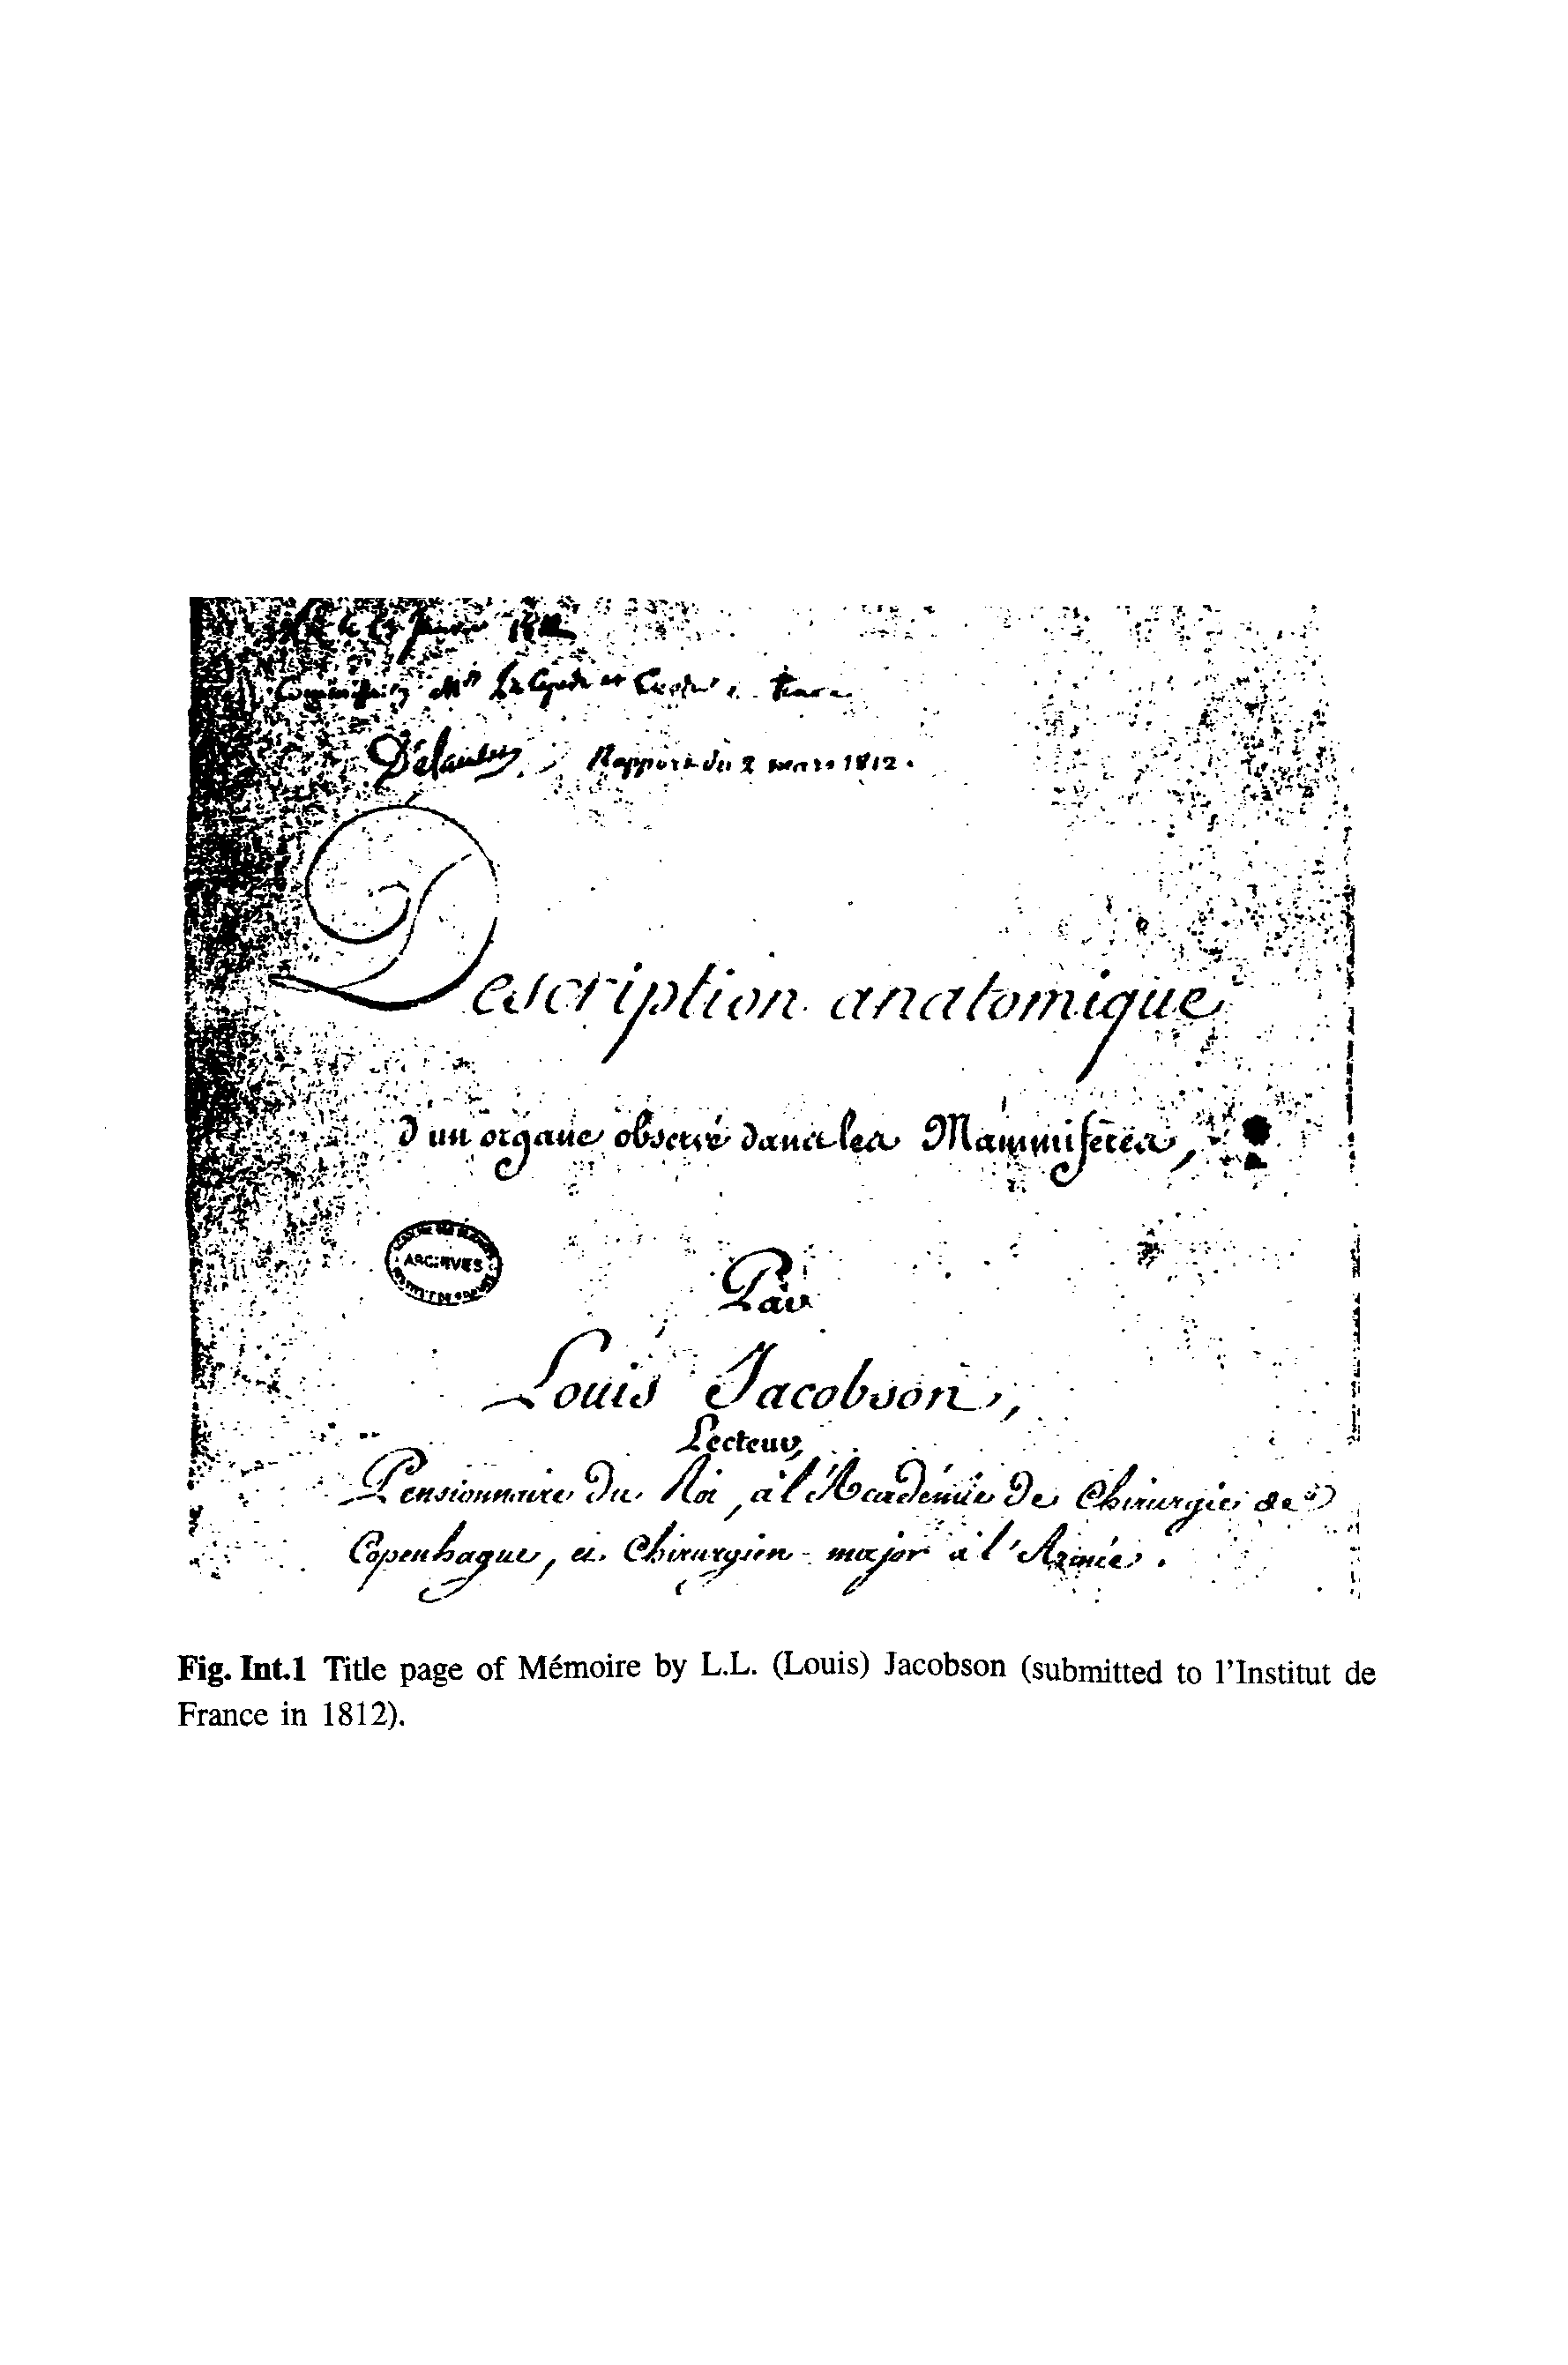 Fig. Inti Title page of Memoire by L.L. (Louis) Jacobson (submitted to lTnstitut de France in 1812).